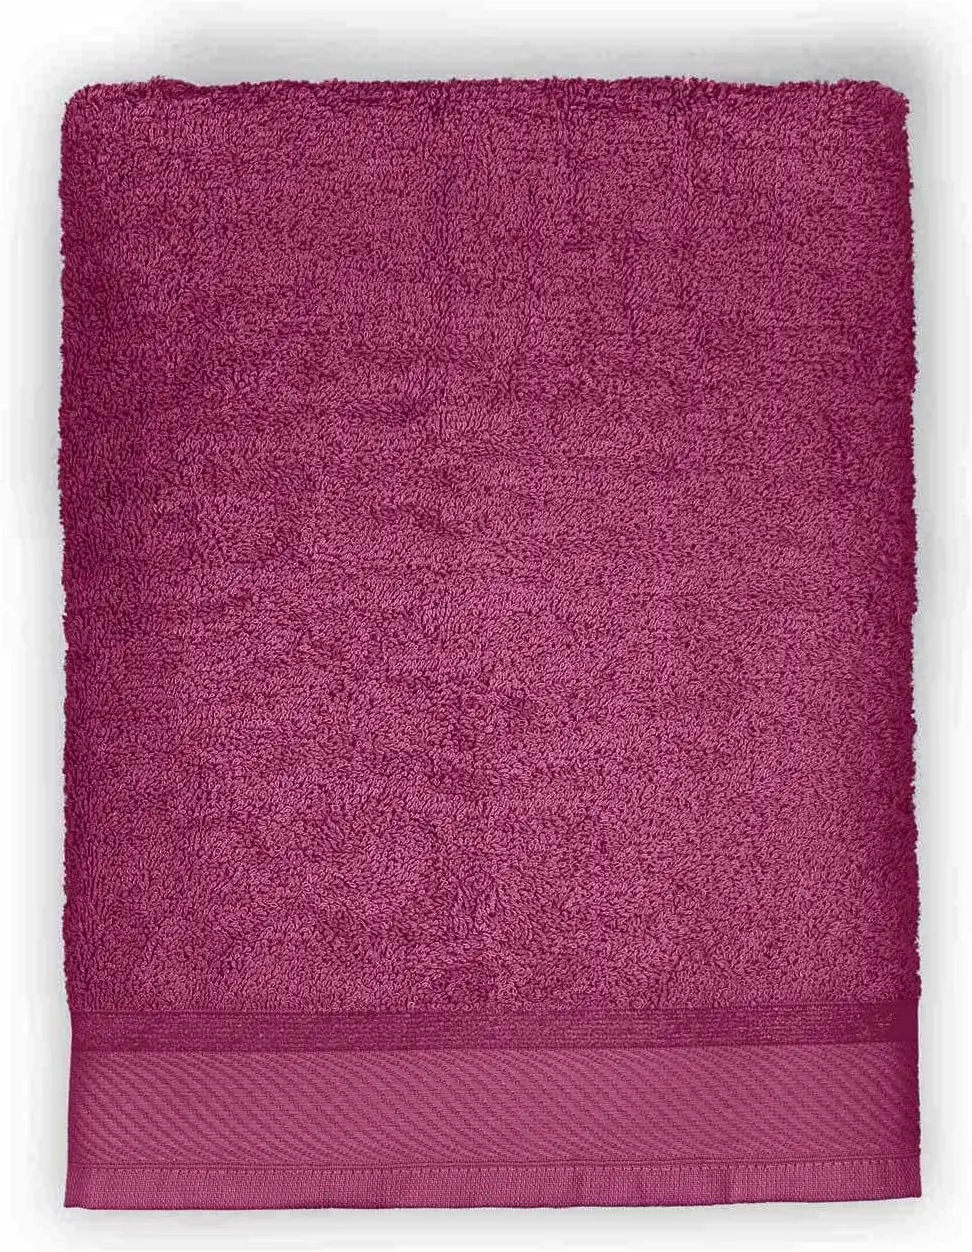 

Giant Thick Towels 4 Pieces Luxury Game - Canada (Fuchsia) Face Towel Hand Face Cleaning Hair Shower Microfiber Towels Bathroom